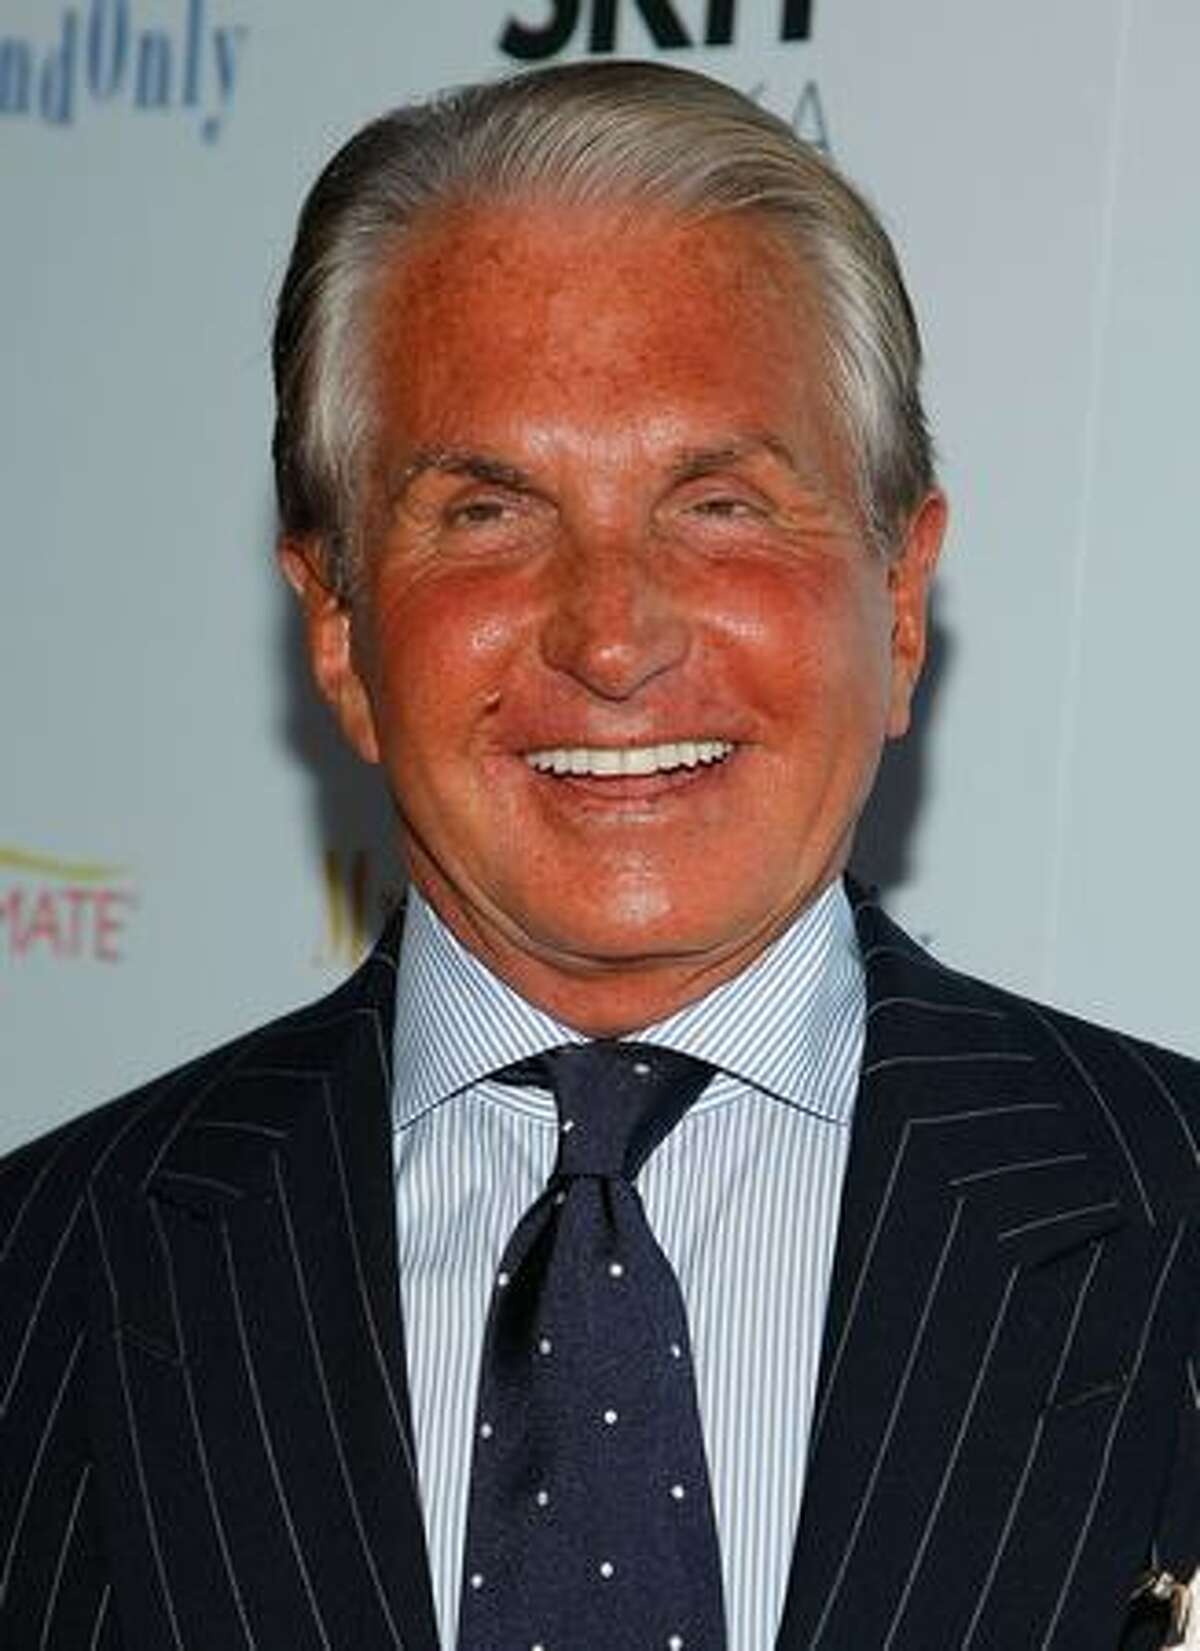 Actor George Hamilton attends the premiere of "My One And Only" at the Paris Theatre in New York City.